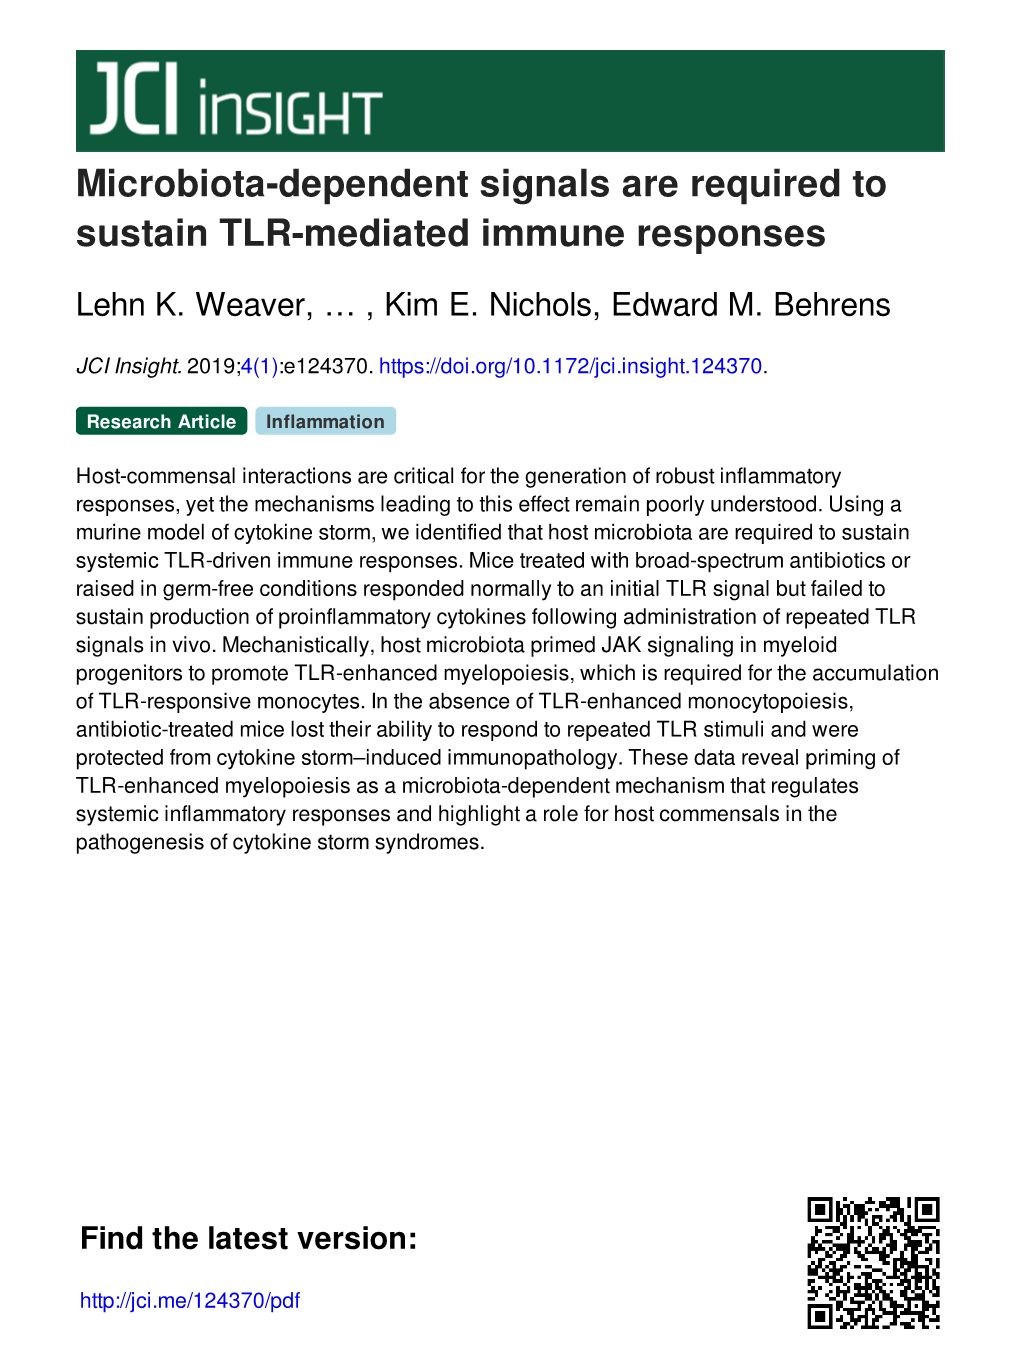 Microbiota-Dependent Signals Are Required to Sustain TLR-Mediated Immune Responses